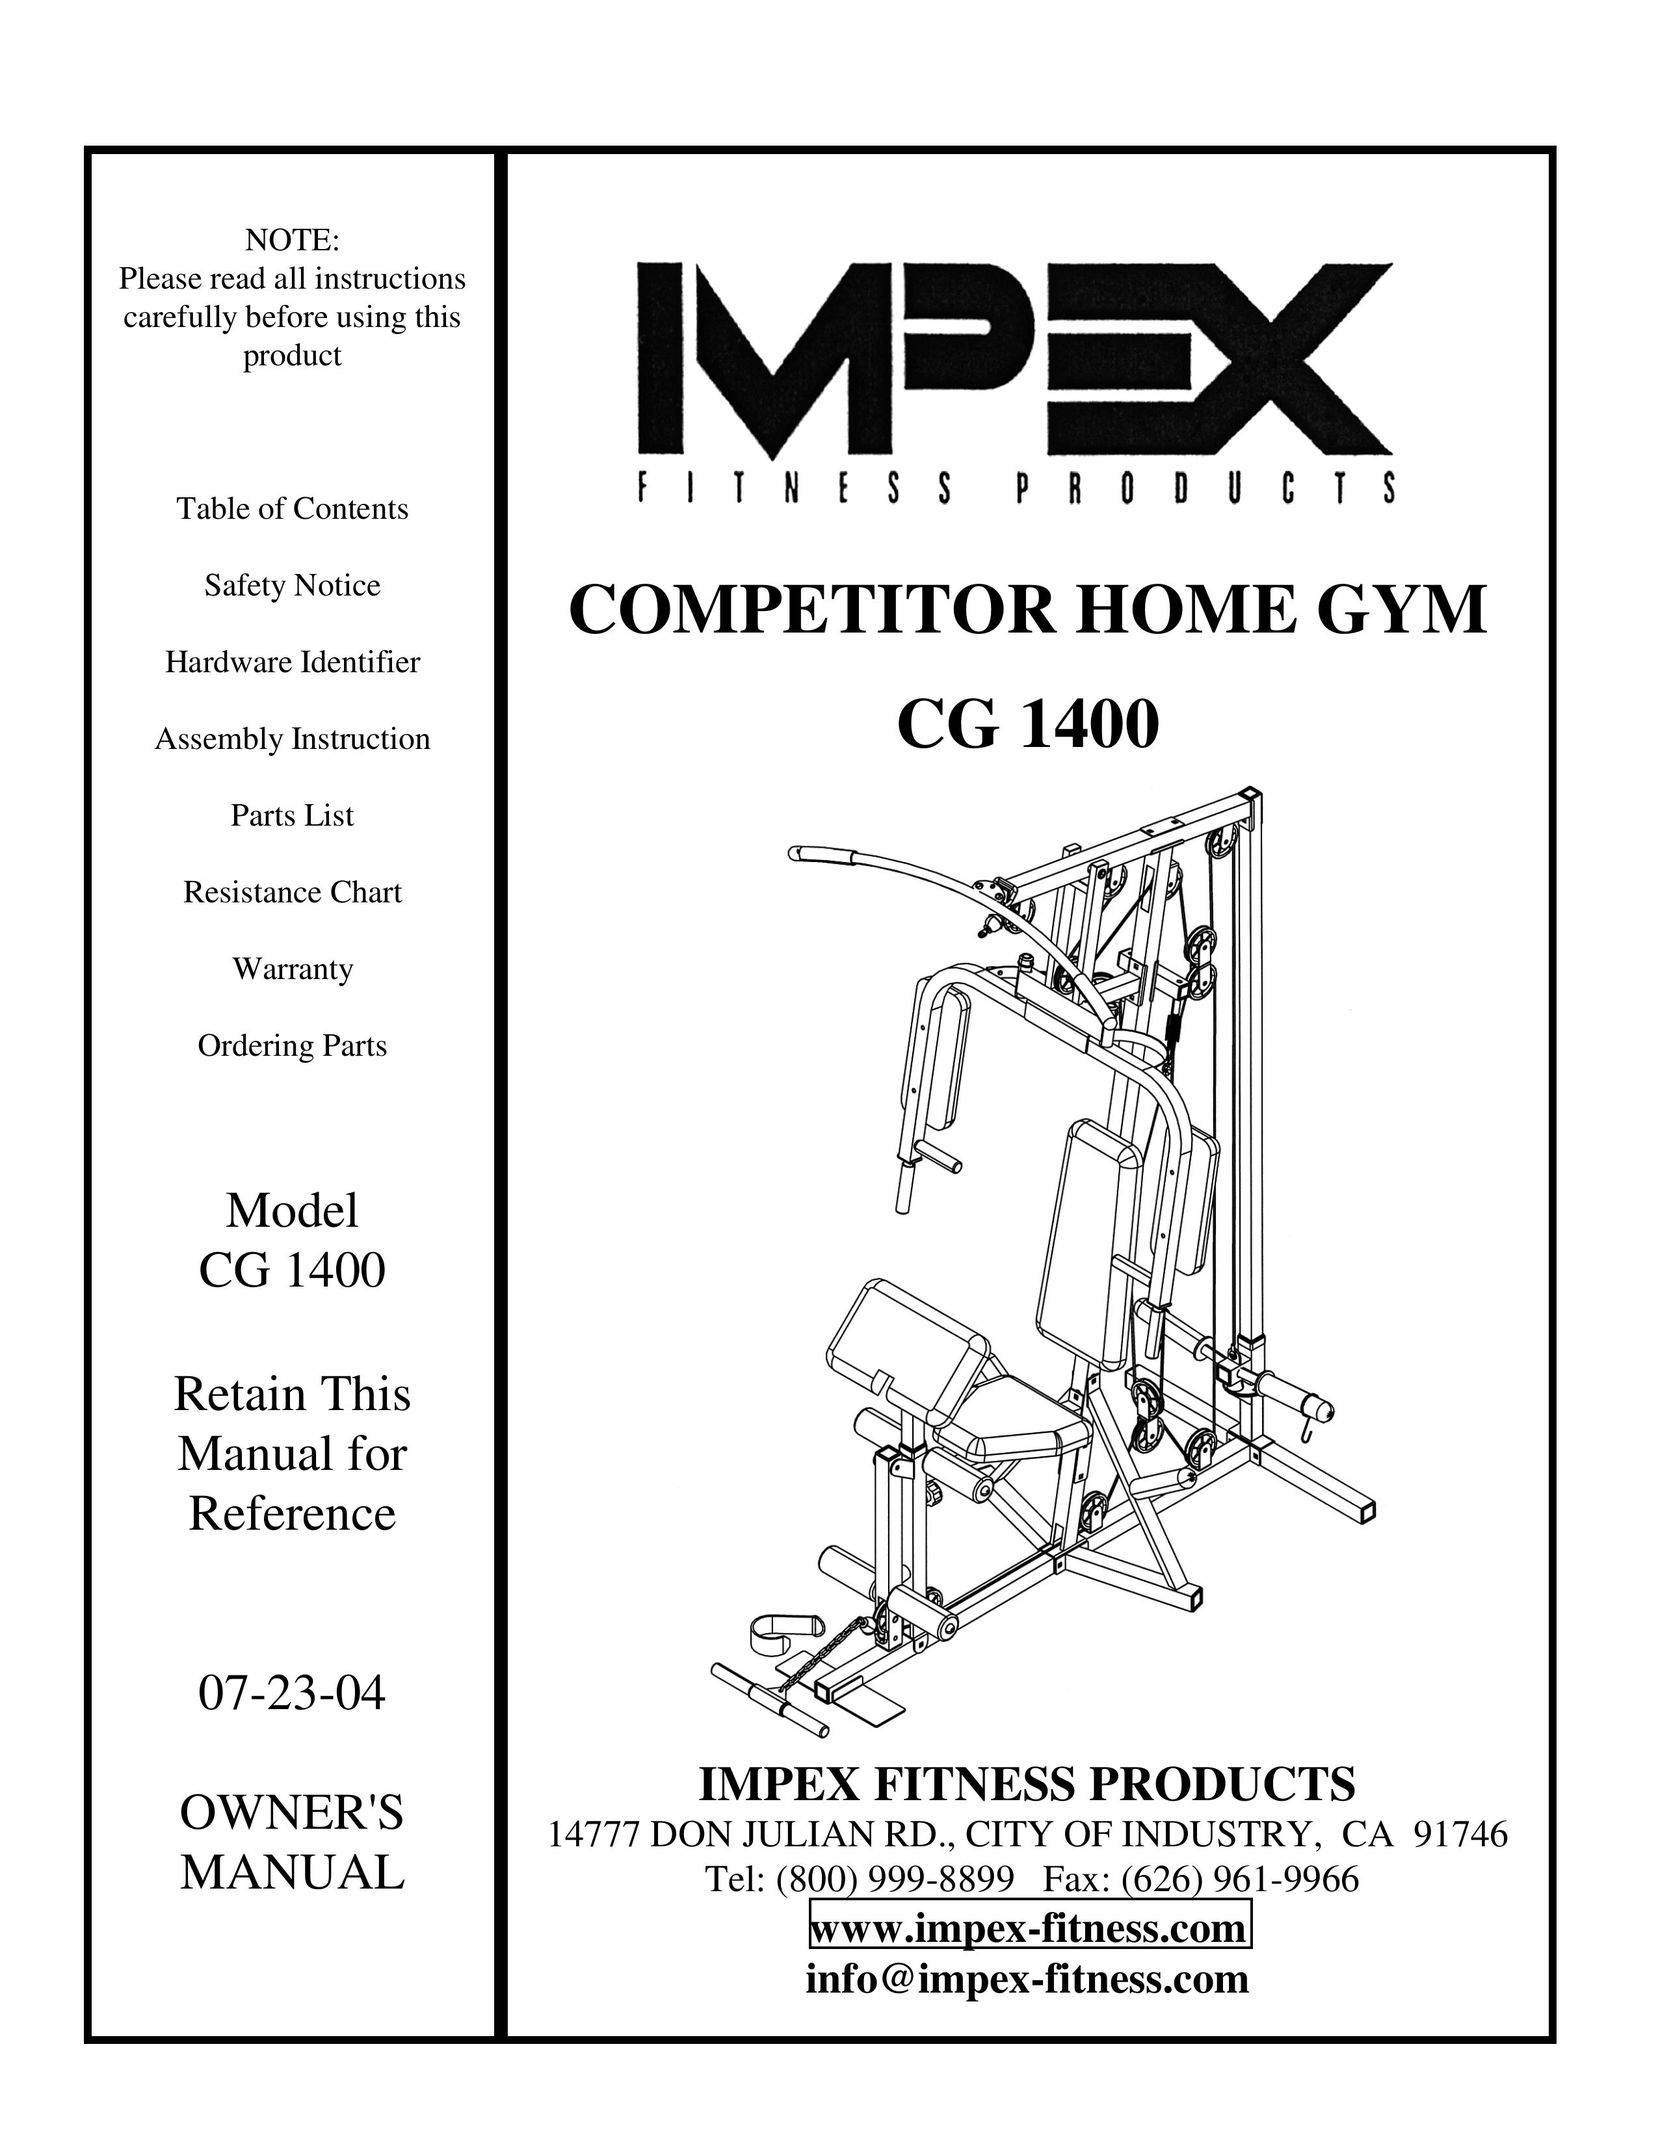 Impex CG 1400 Home Gym User Manual